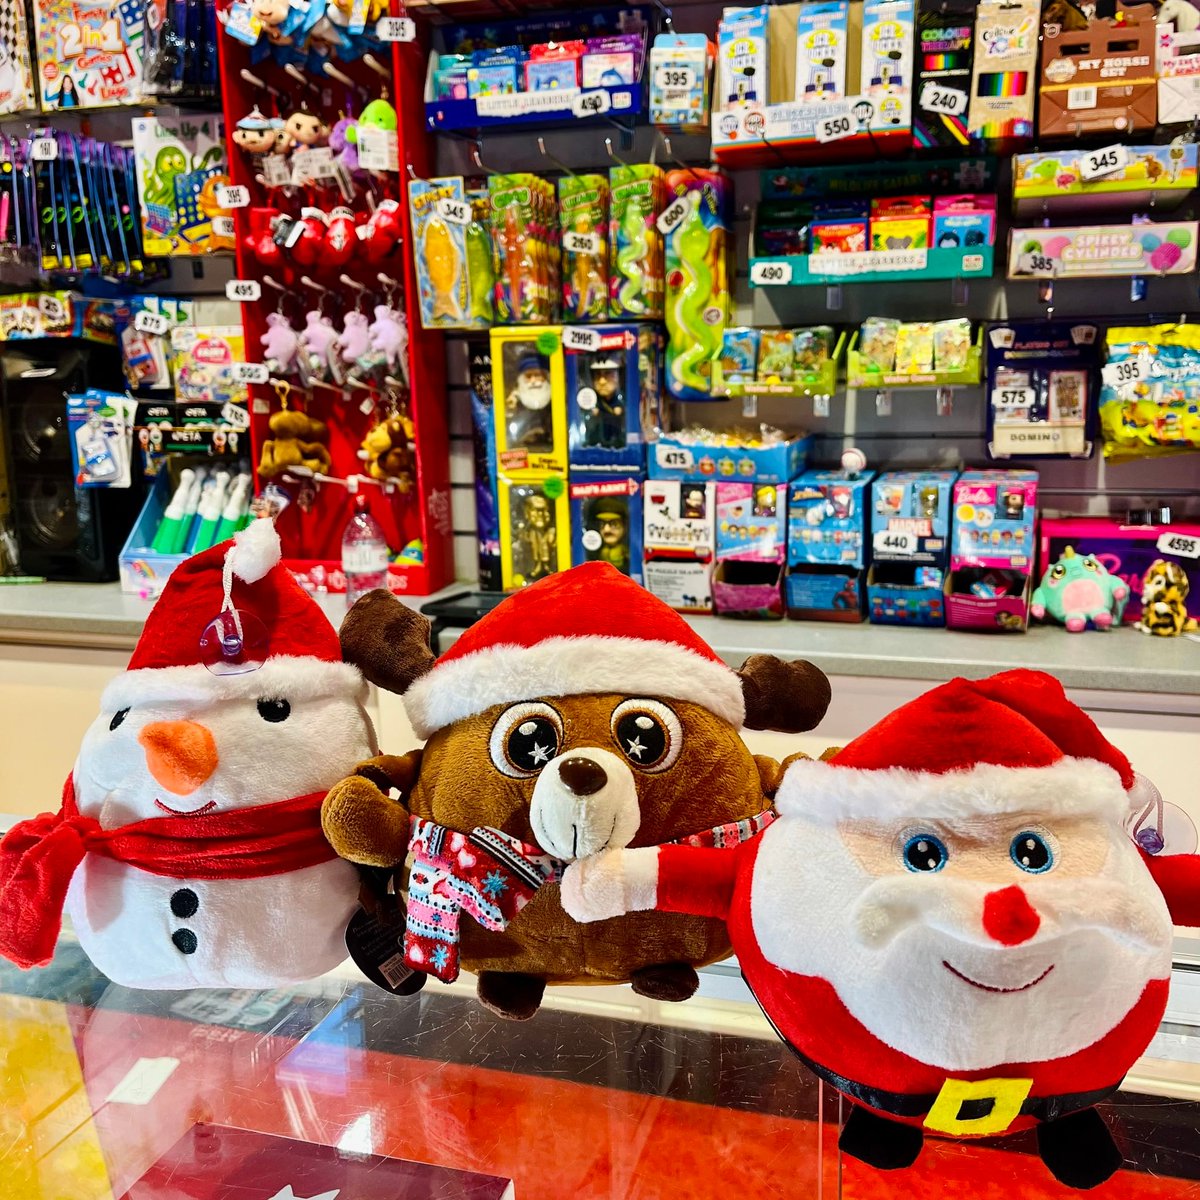 Who are you taking home? ☃️🦌🎅

Visit Funstation and load up your Funcard with the £25 Christmas Bonus between now and Christmas Eve and you will receive a FREE Christmas plush 🌟

*whilst stock lasts